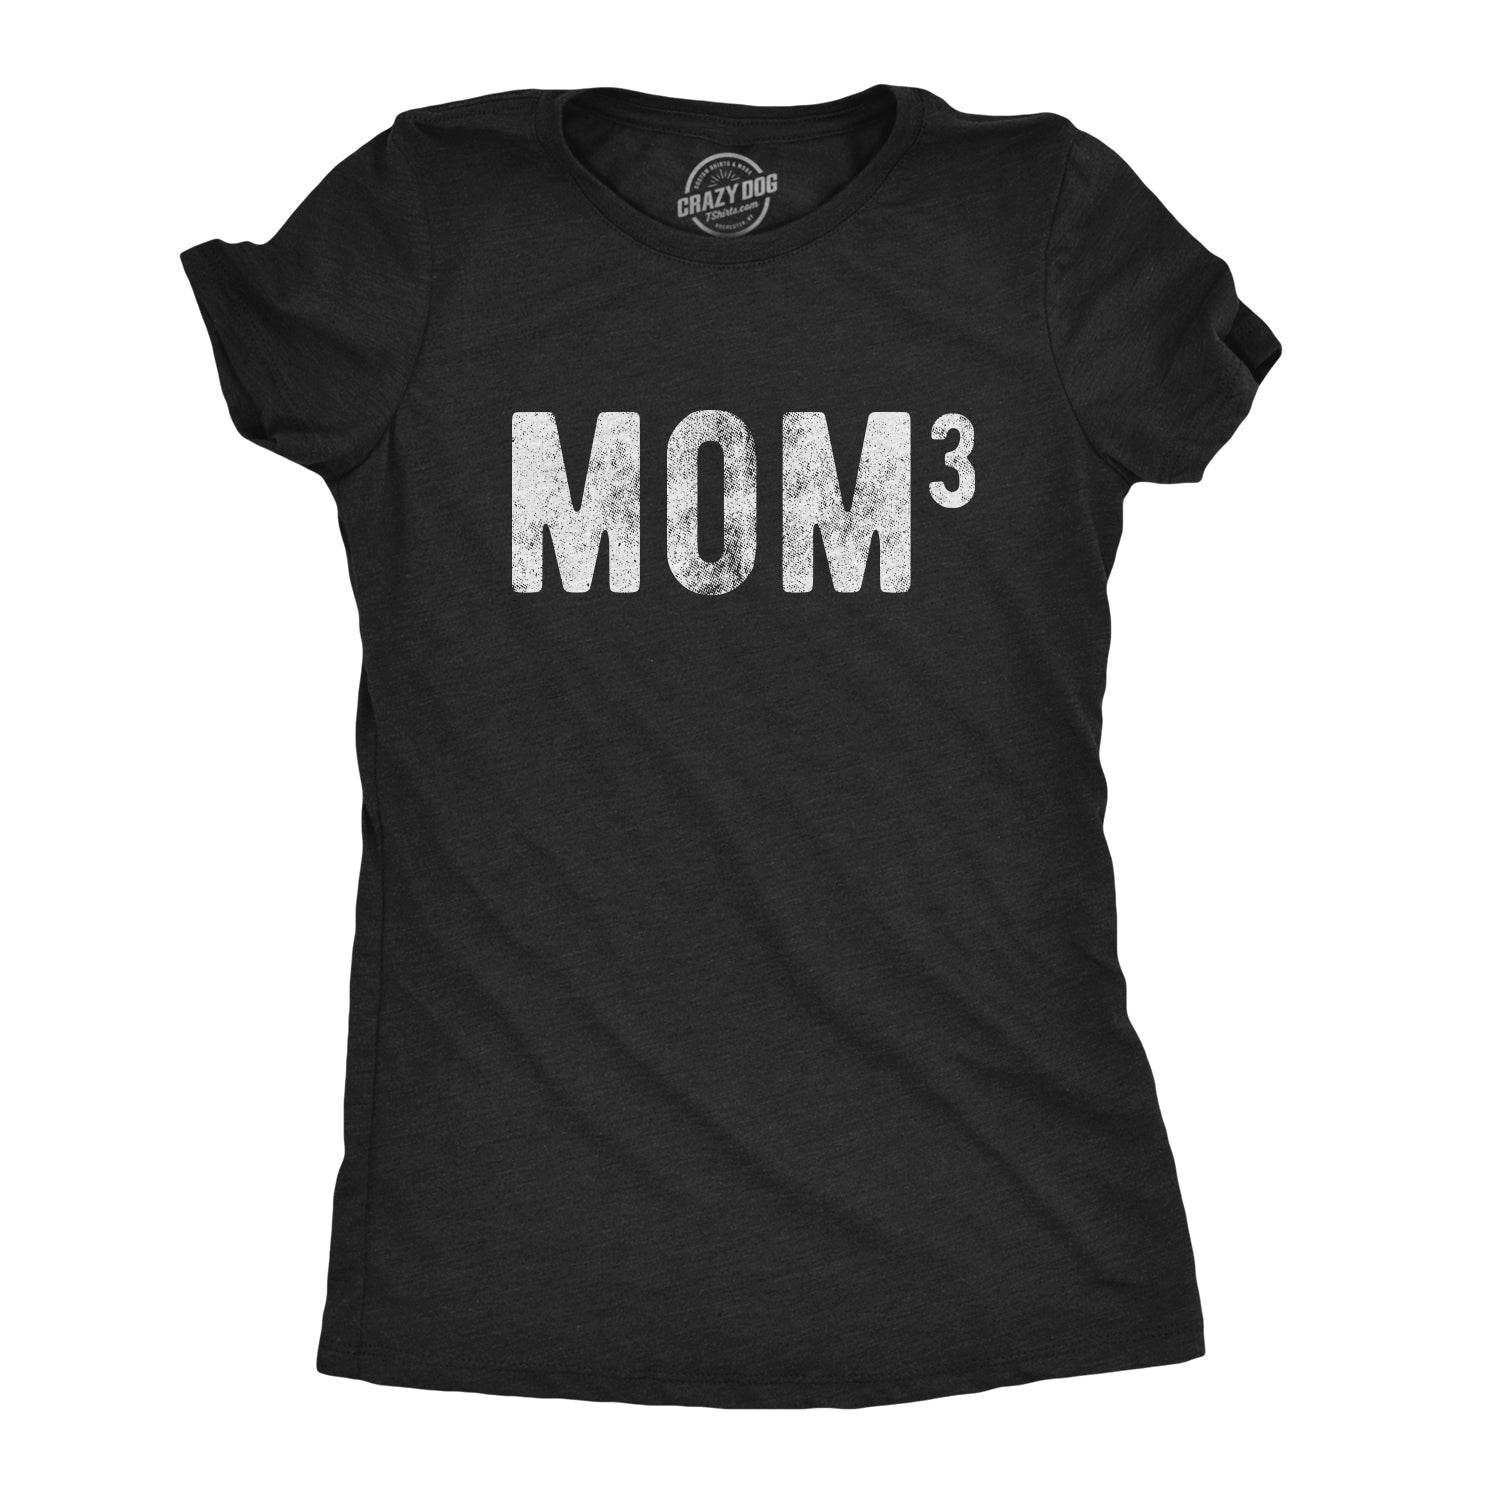 Funny Heather Black - Mom Cubed Mom Of Three Womens T Shirt Nerdy Mother's Day Nerdy Tee